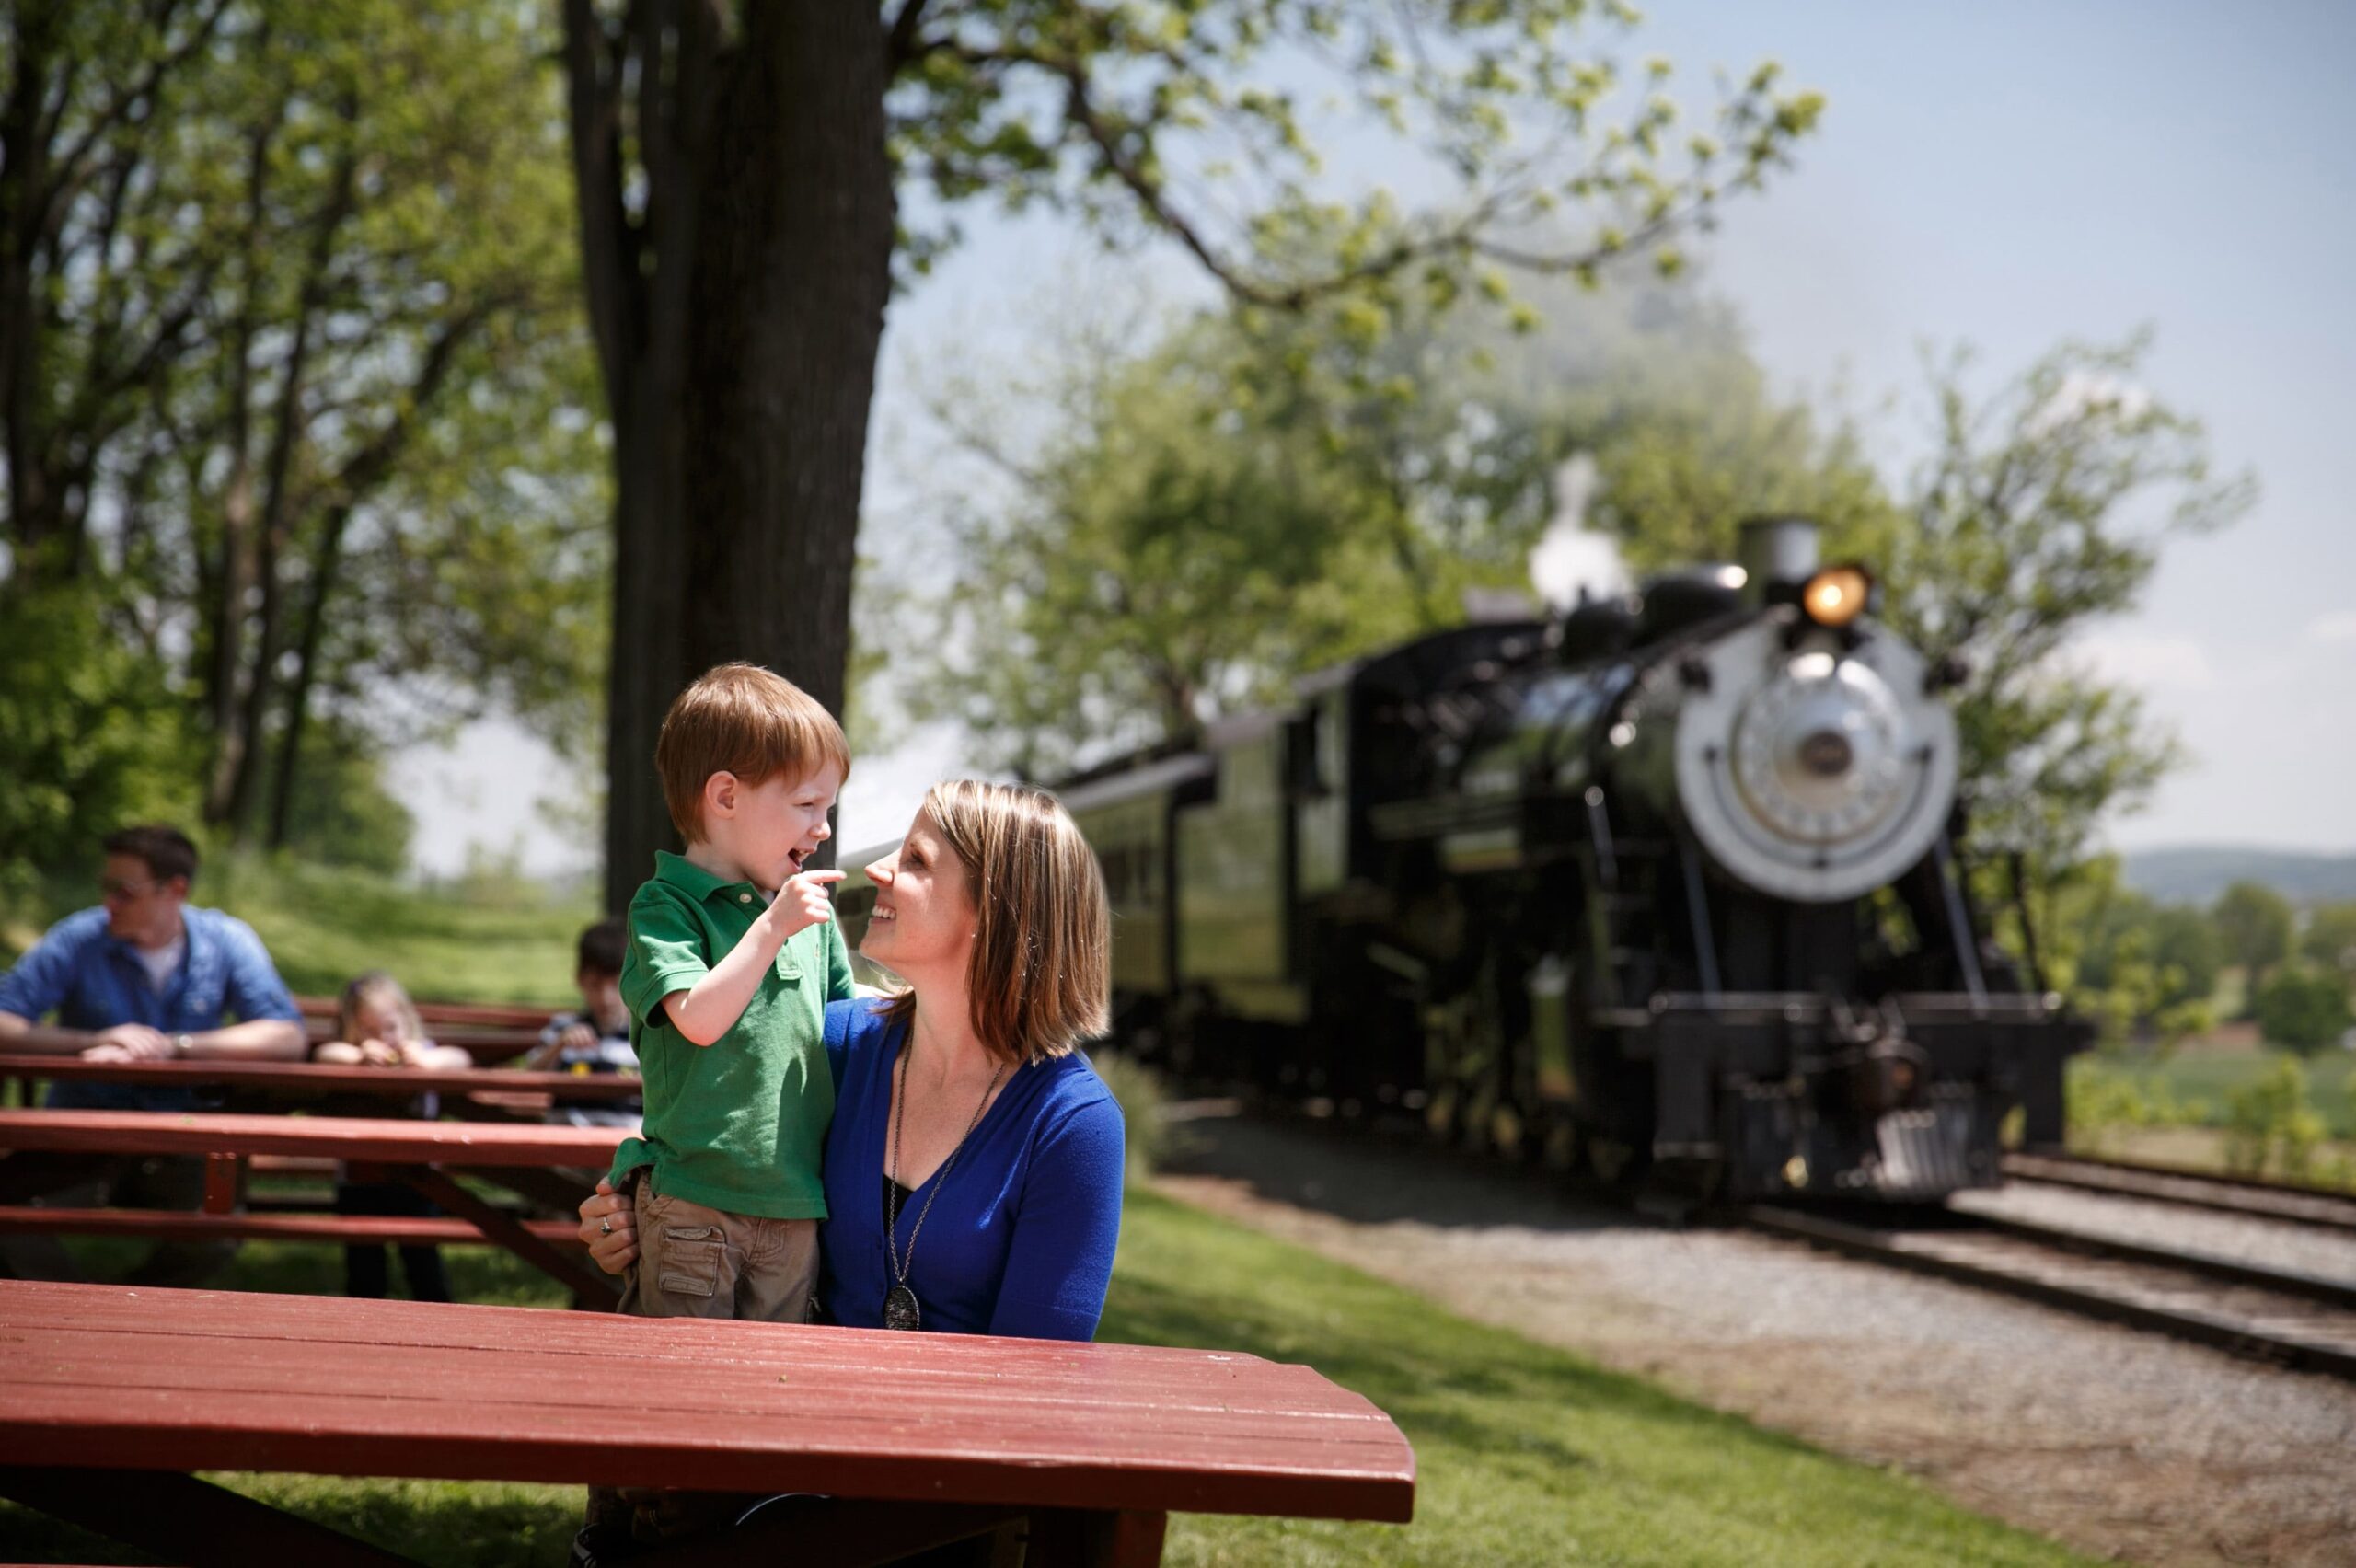 A close up on a mother and child in an outdoor picnic area with a train in the background.